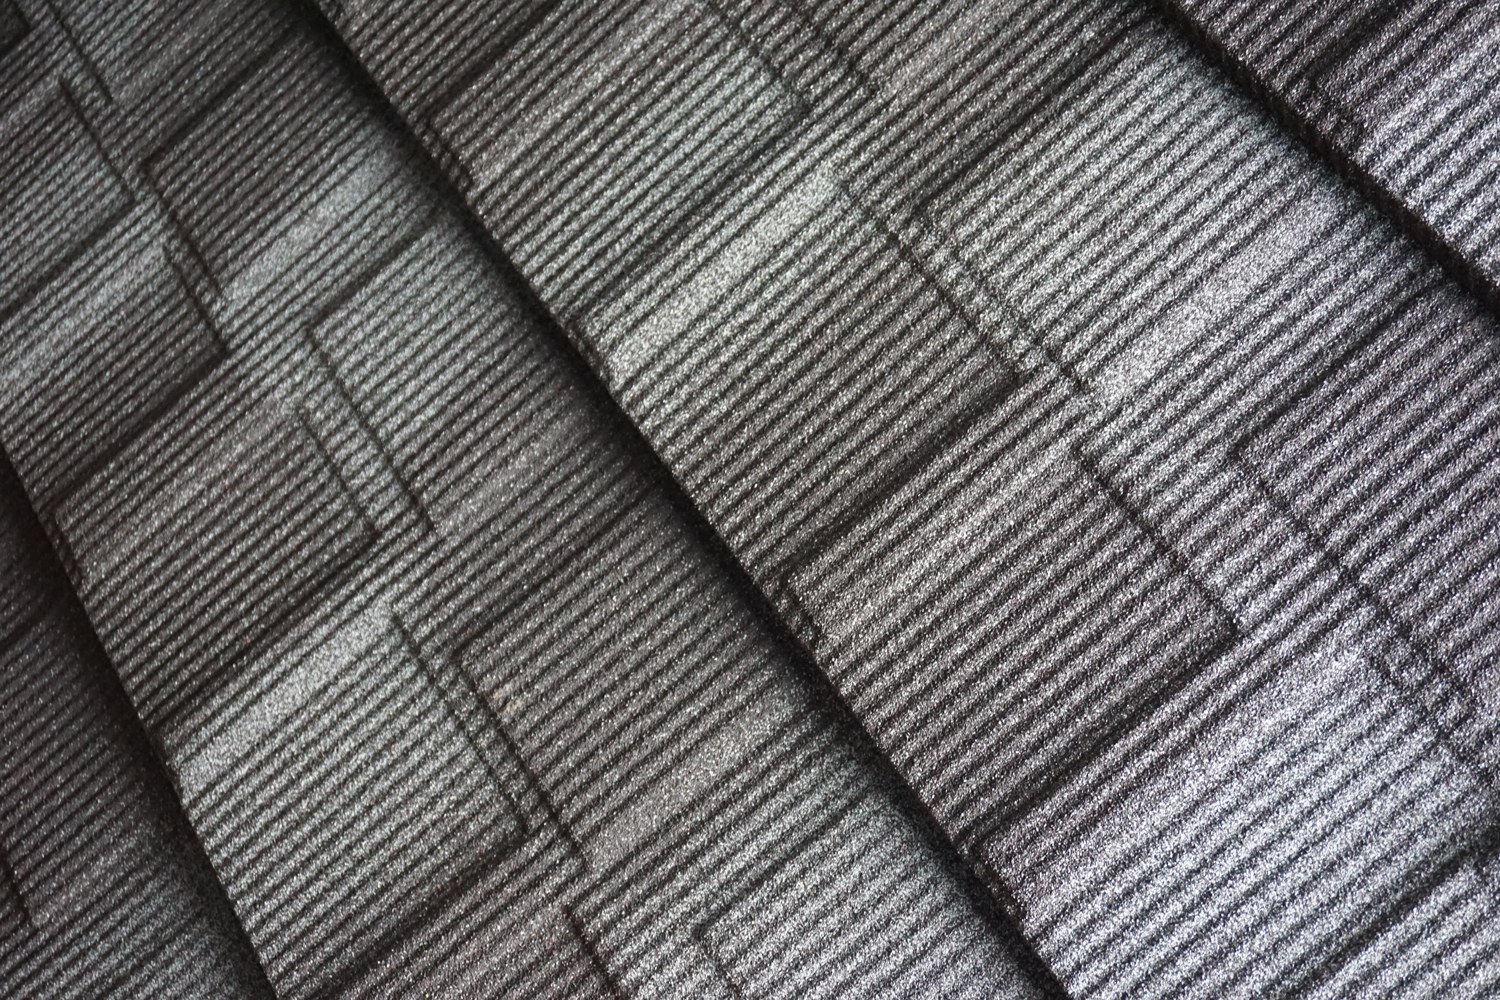 Stone coated metal roofing tile manufacture